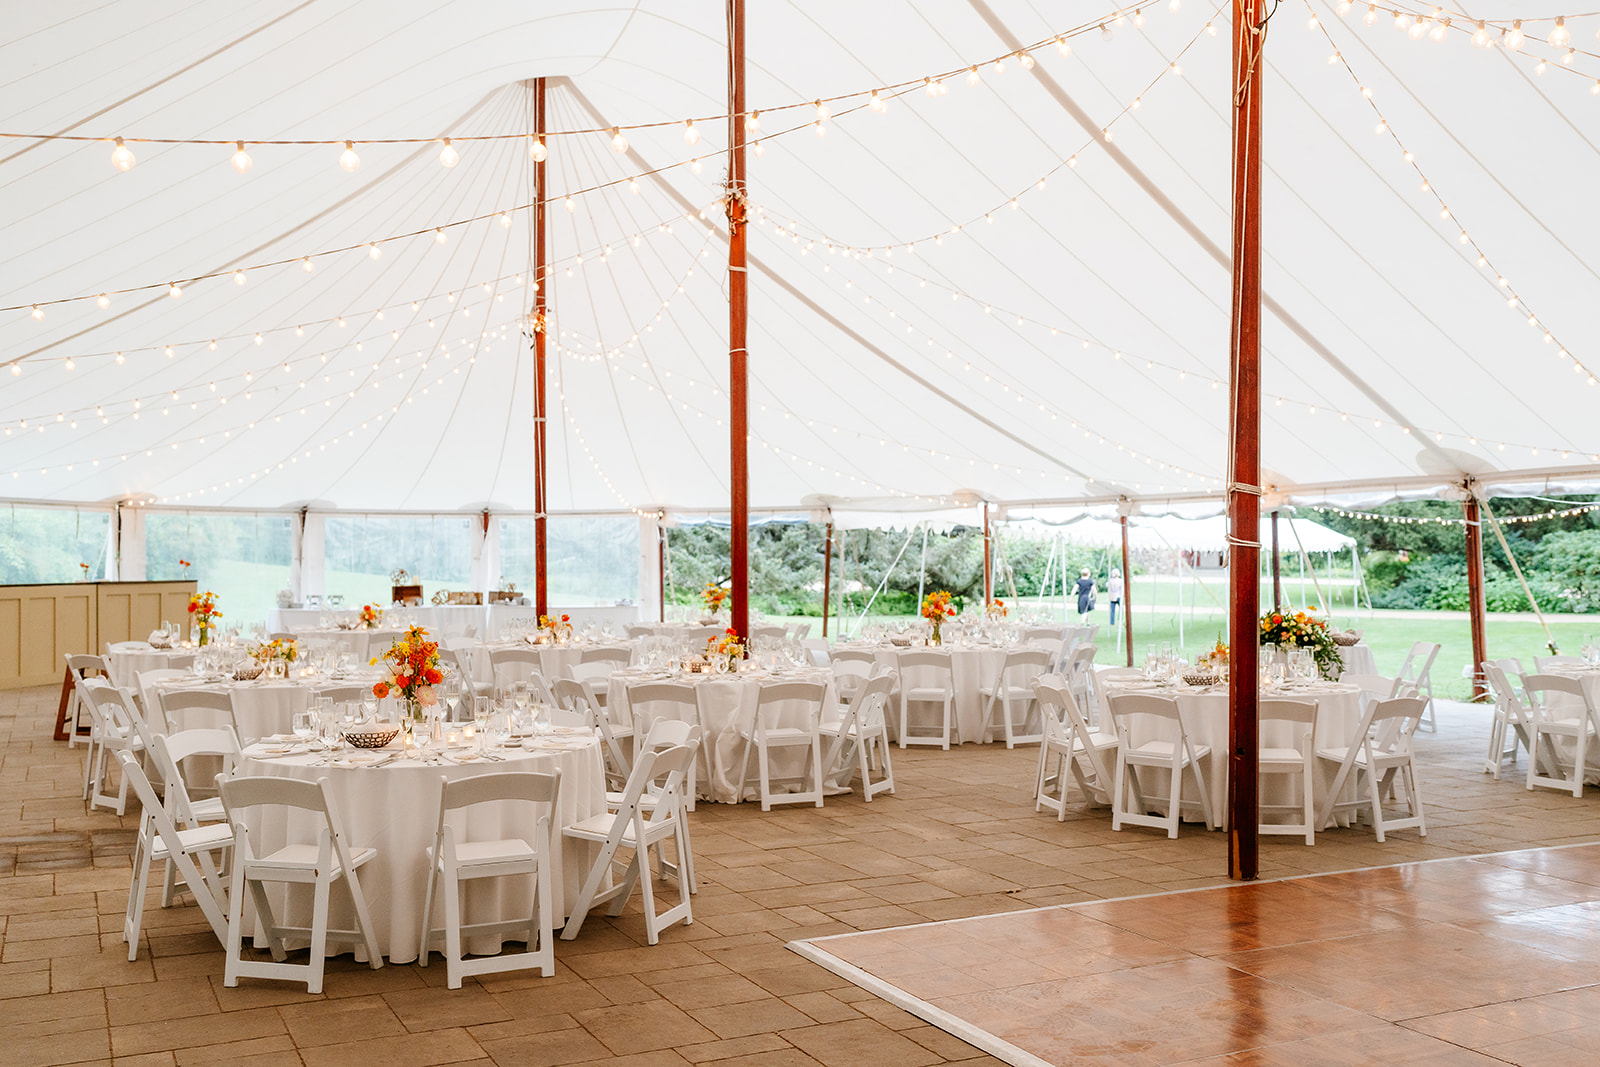 Elegant outdoor tented wedding reception area with string lights and decorated table at the estate at moraine farm